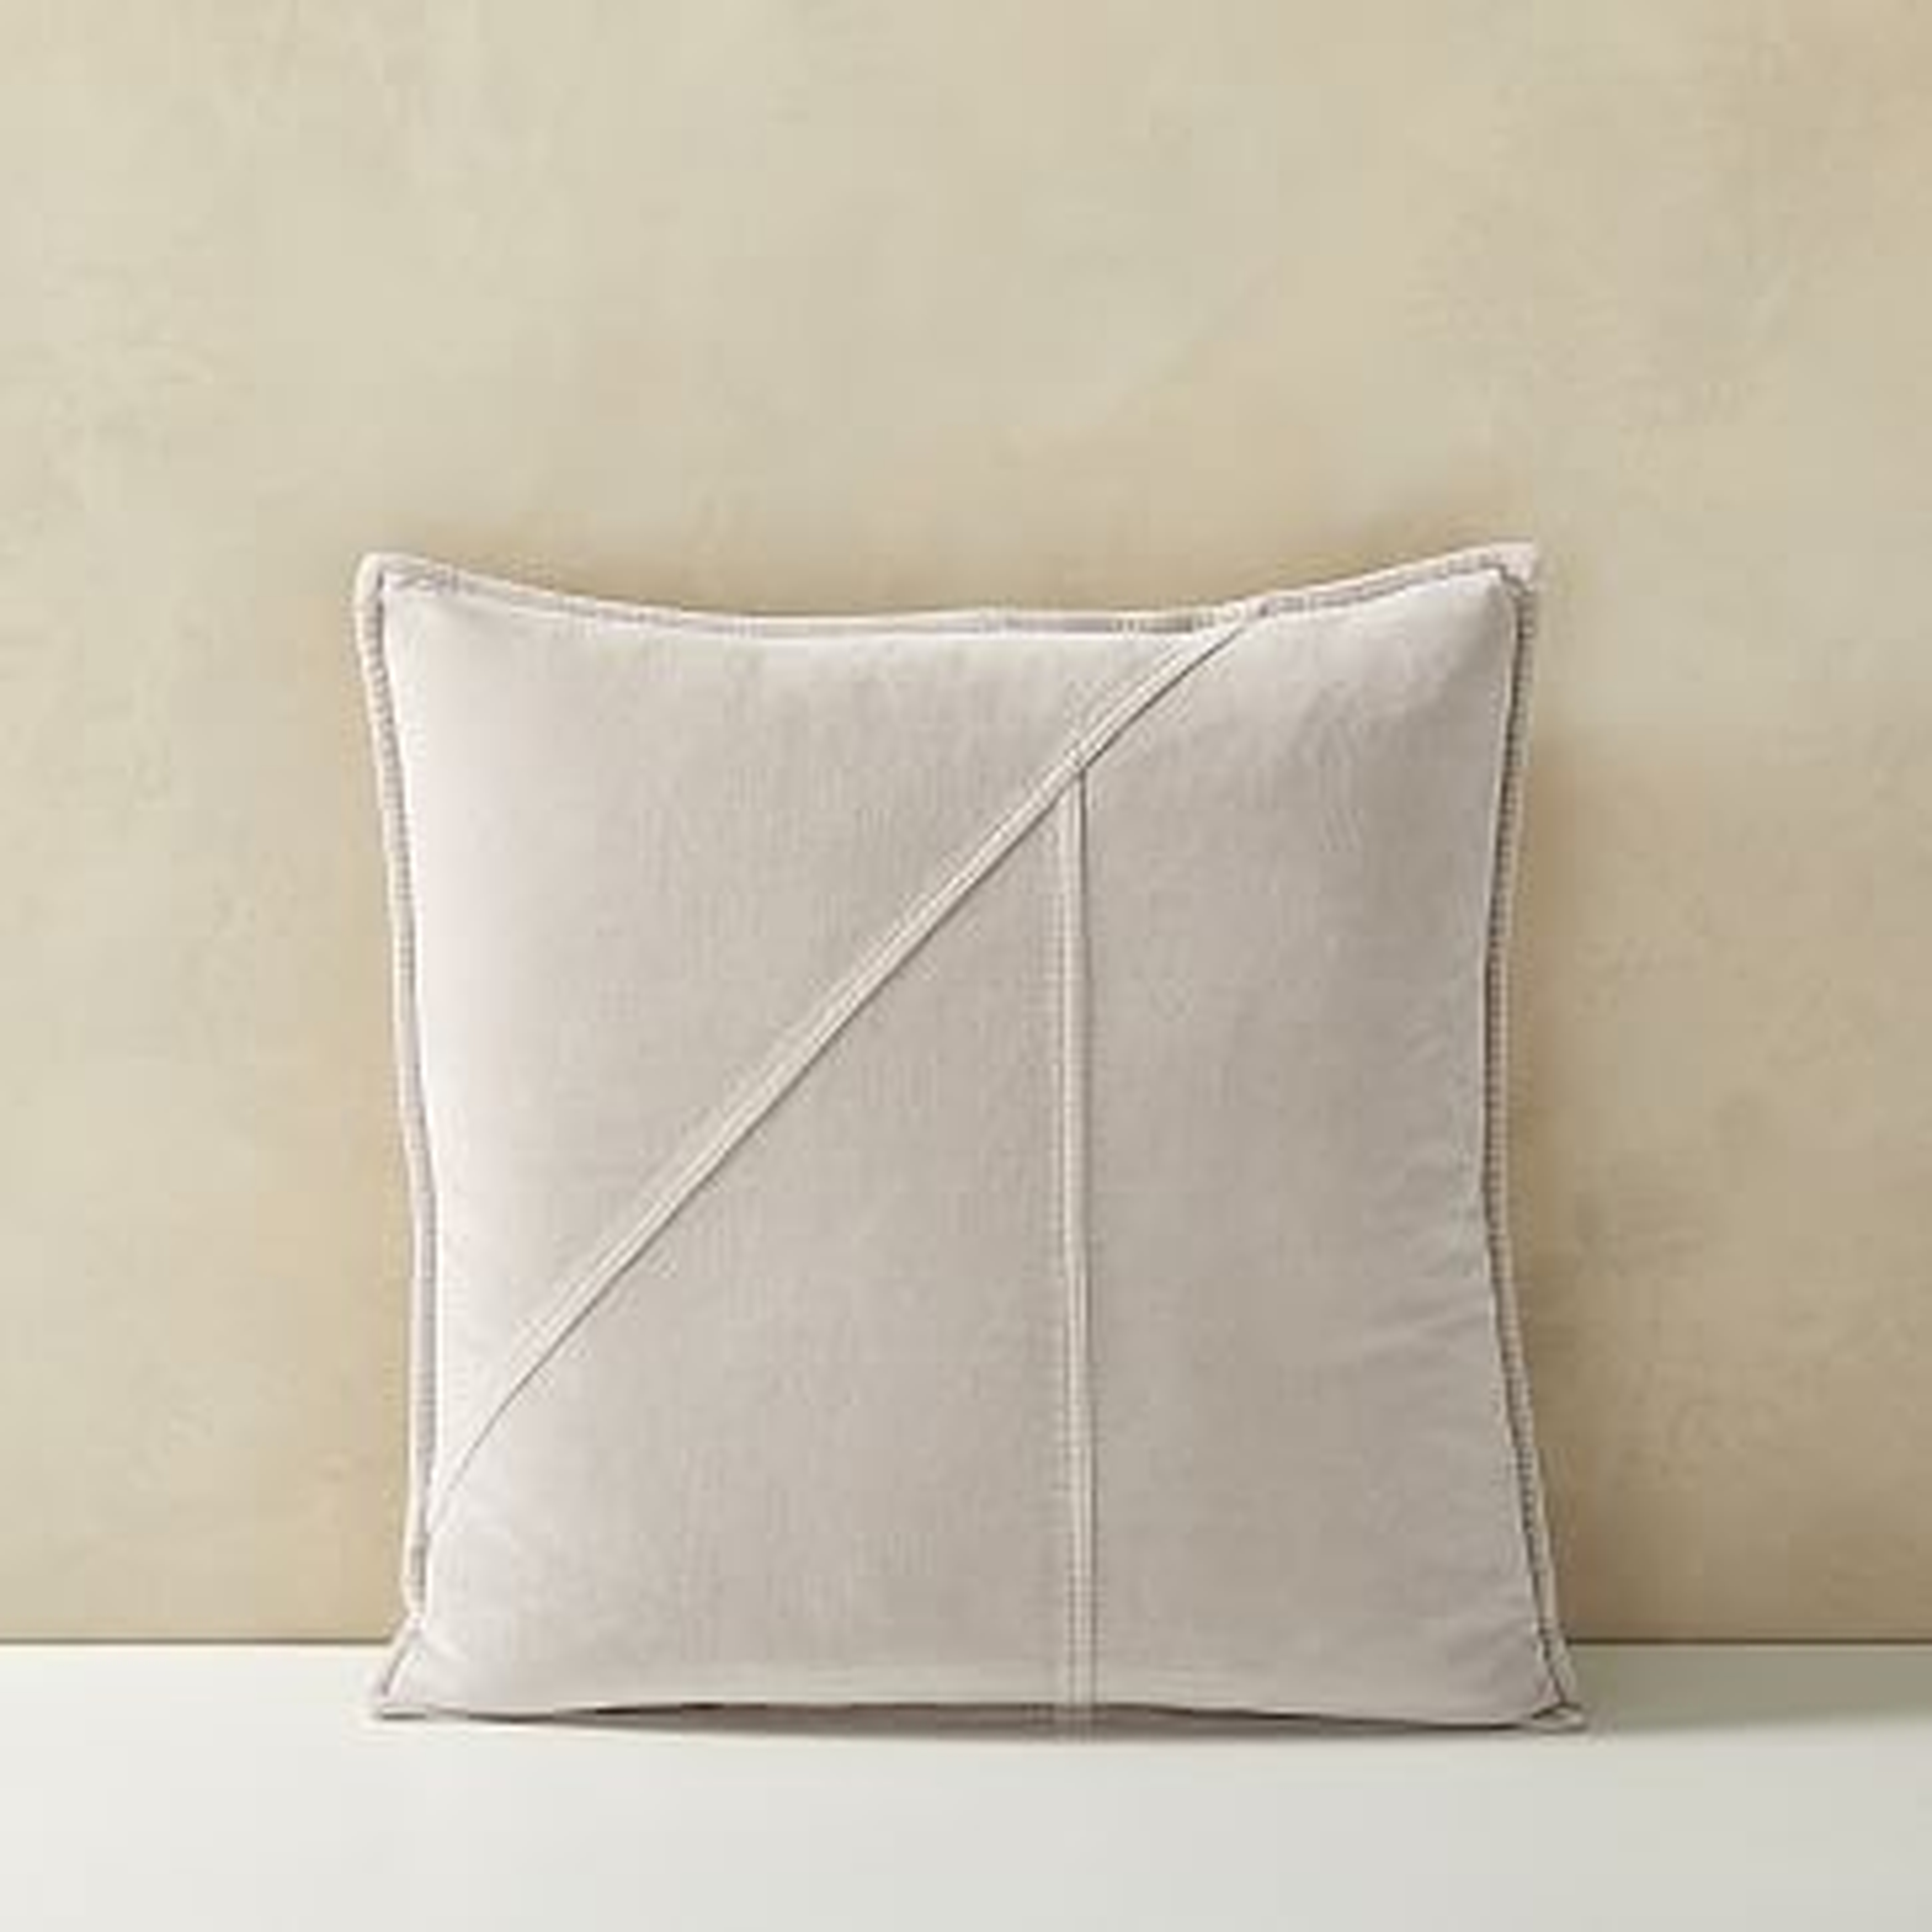 Washed Cotton Velvet Pillow Cover, 18"x18", Stone Gray - West Elm